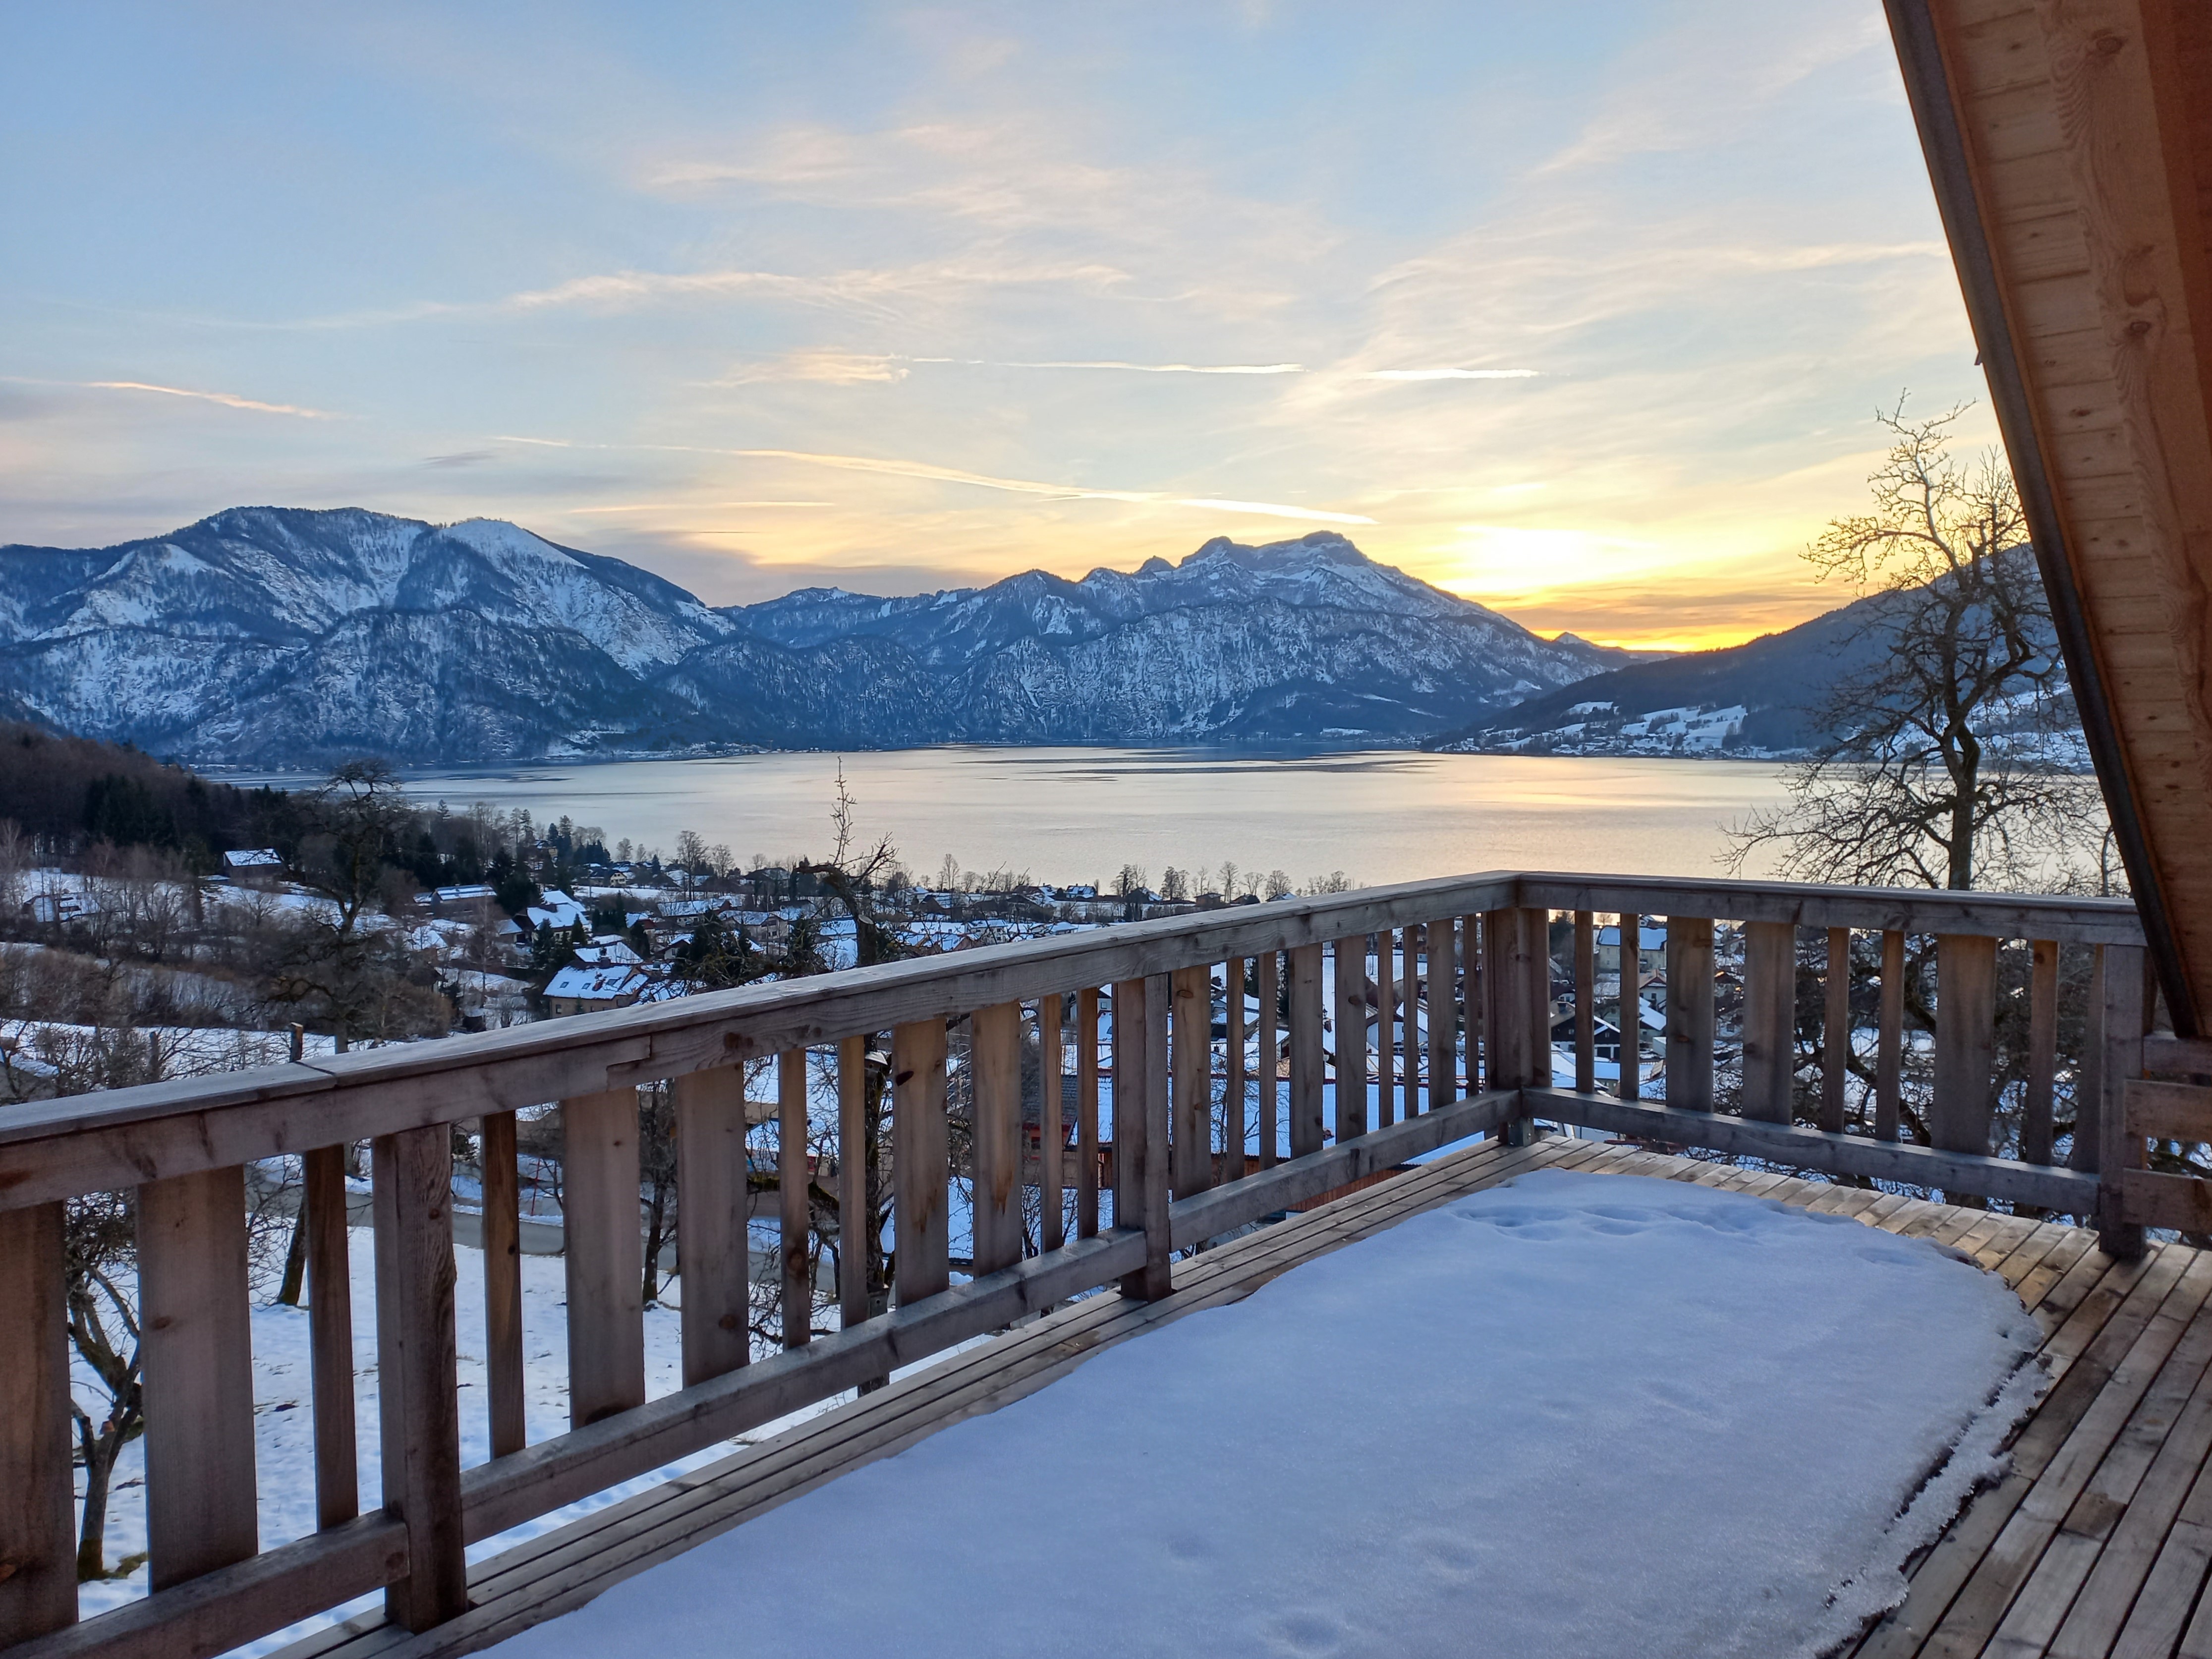 (c) Attersee-chalet.at